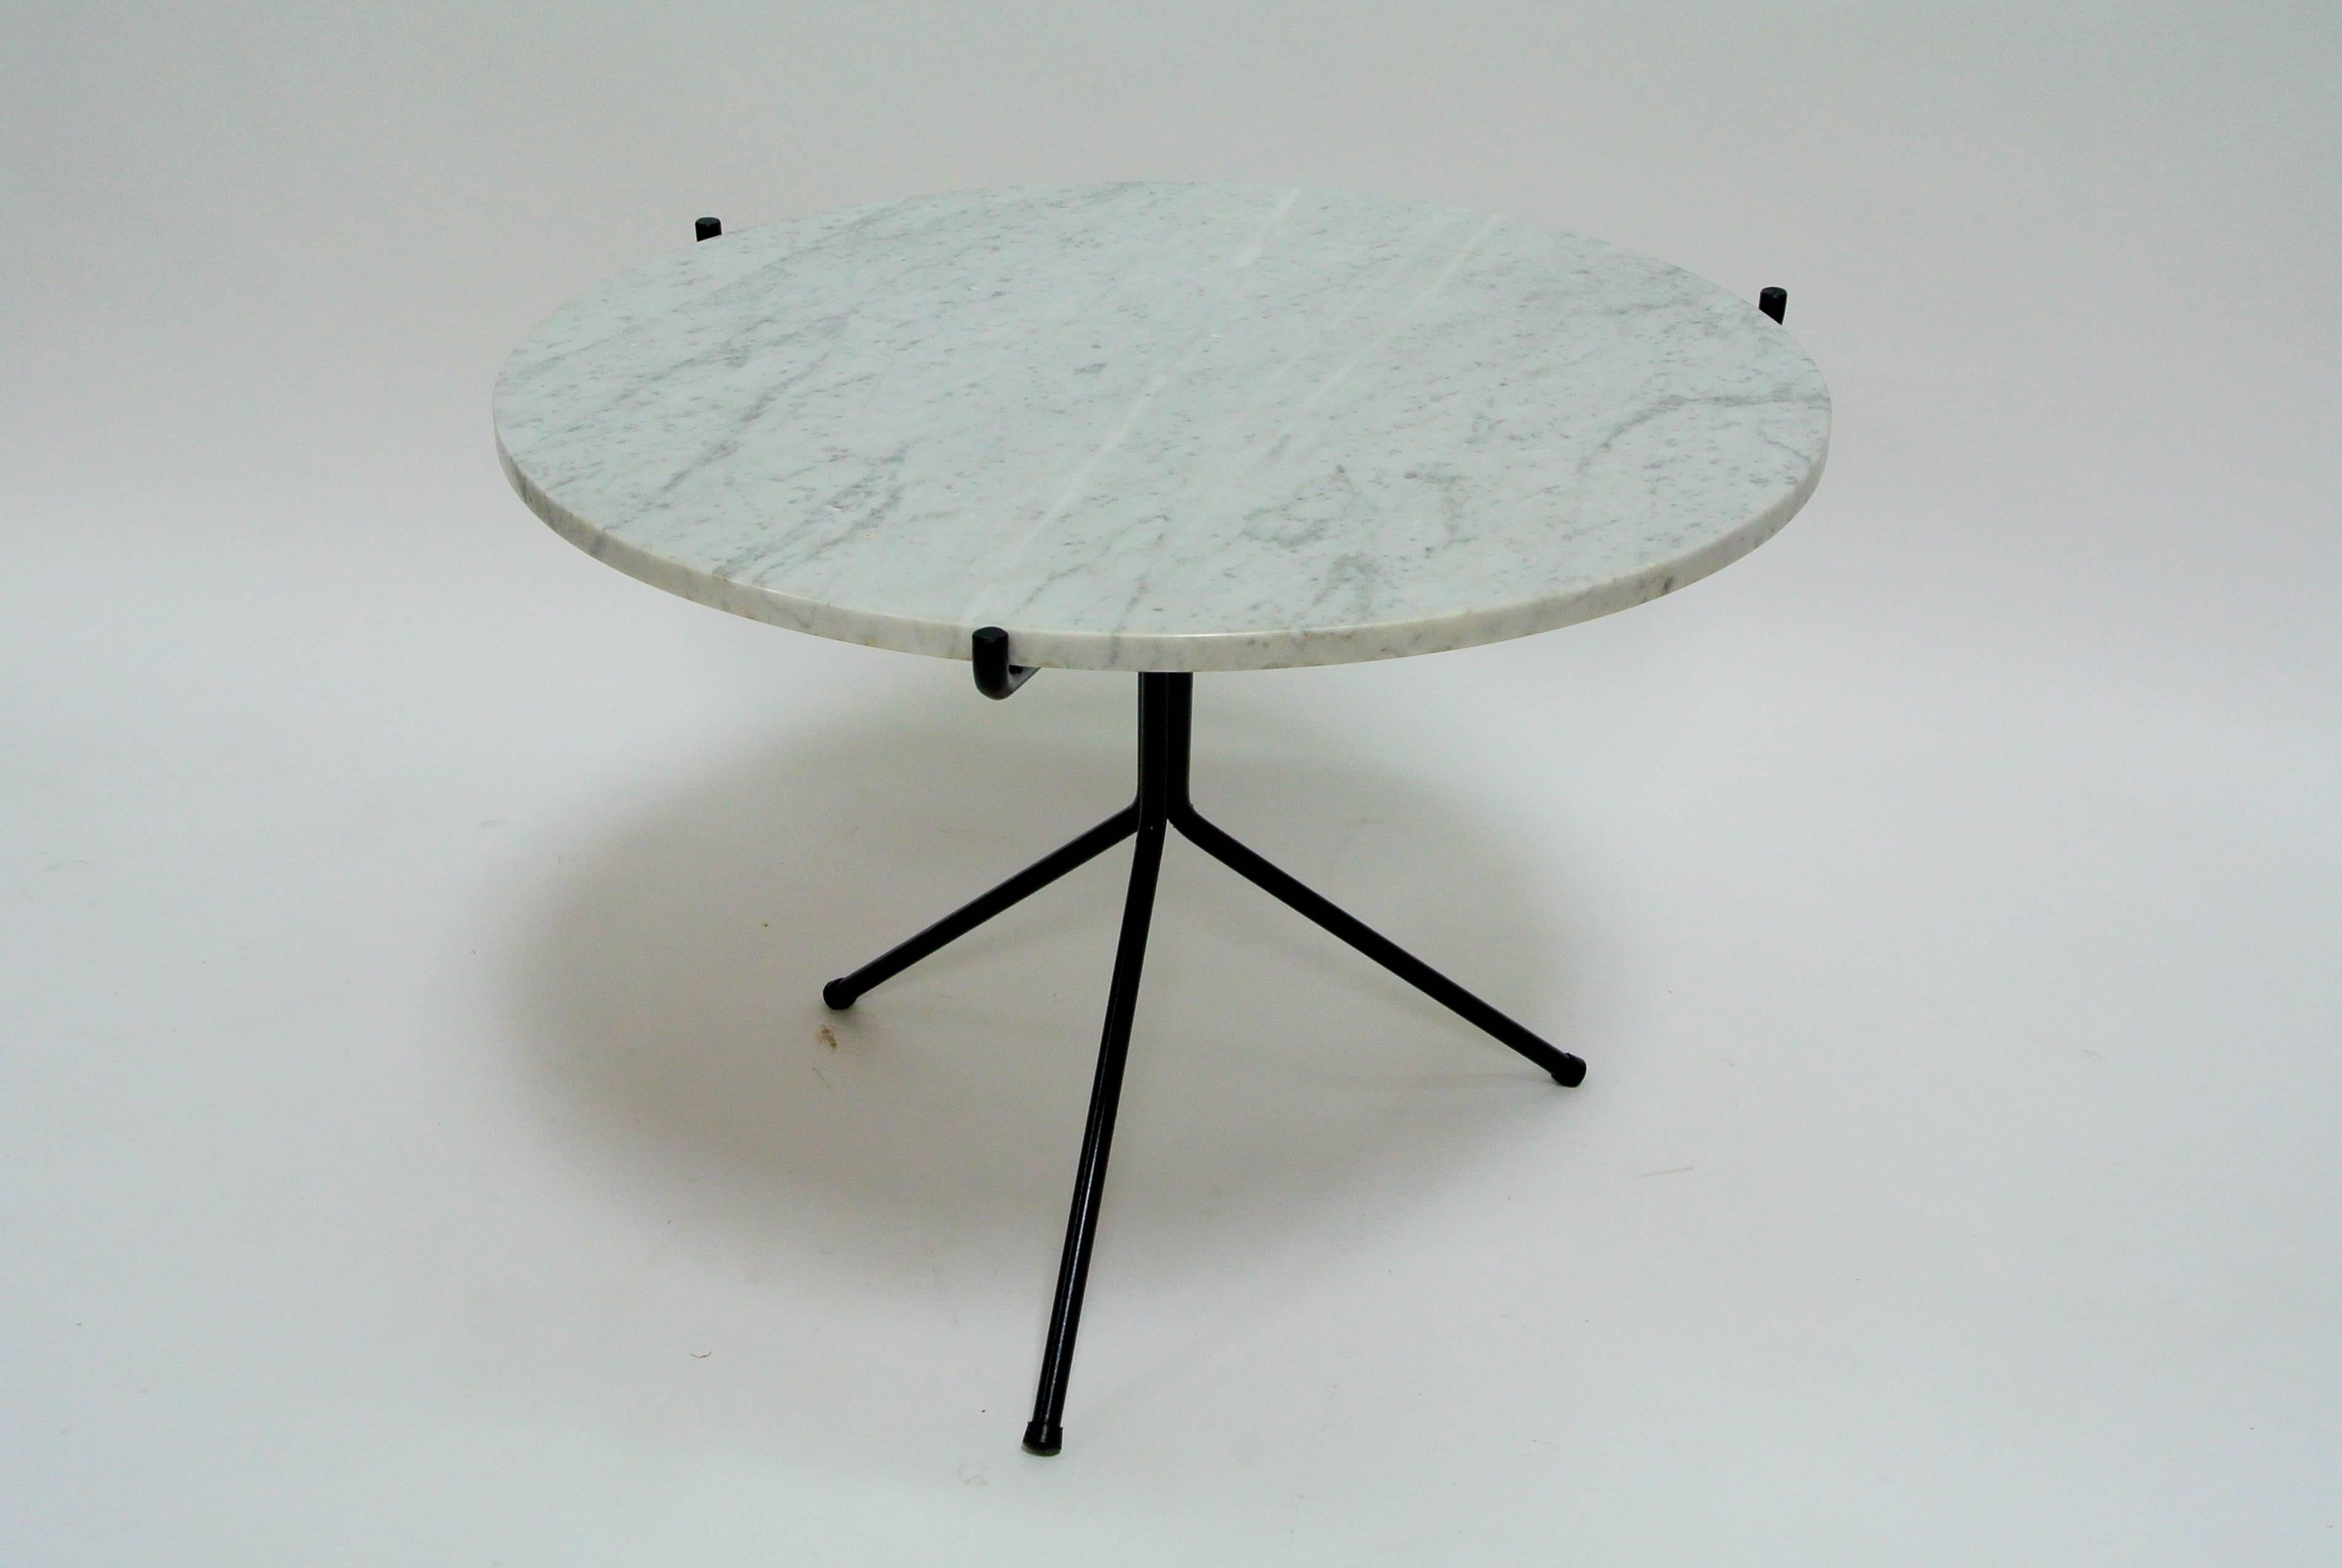 American Rare Norman Cherner Marble and Iron Tripod Table, 1950s For Sale